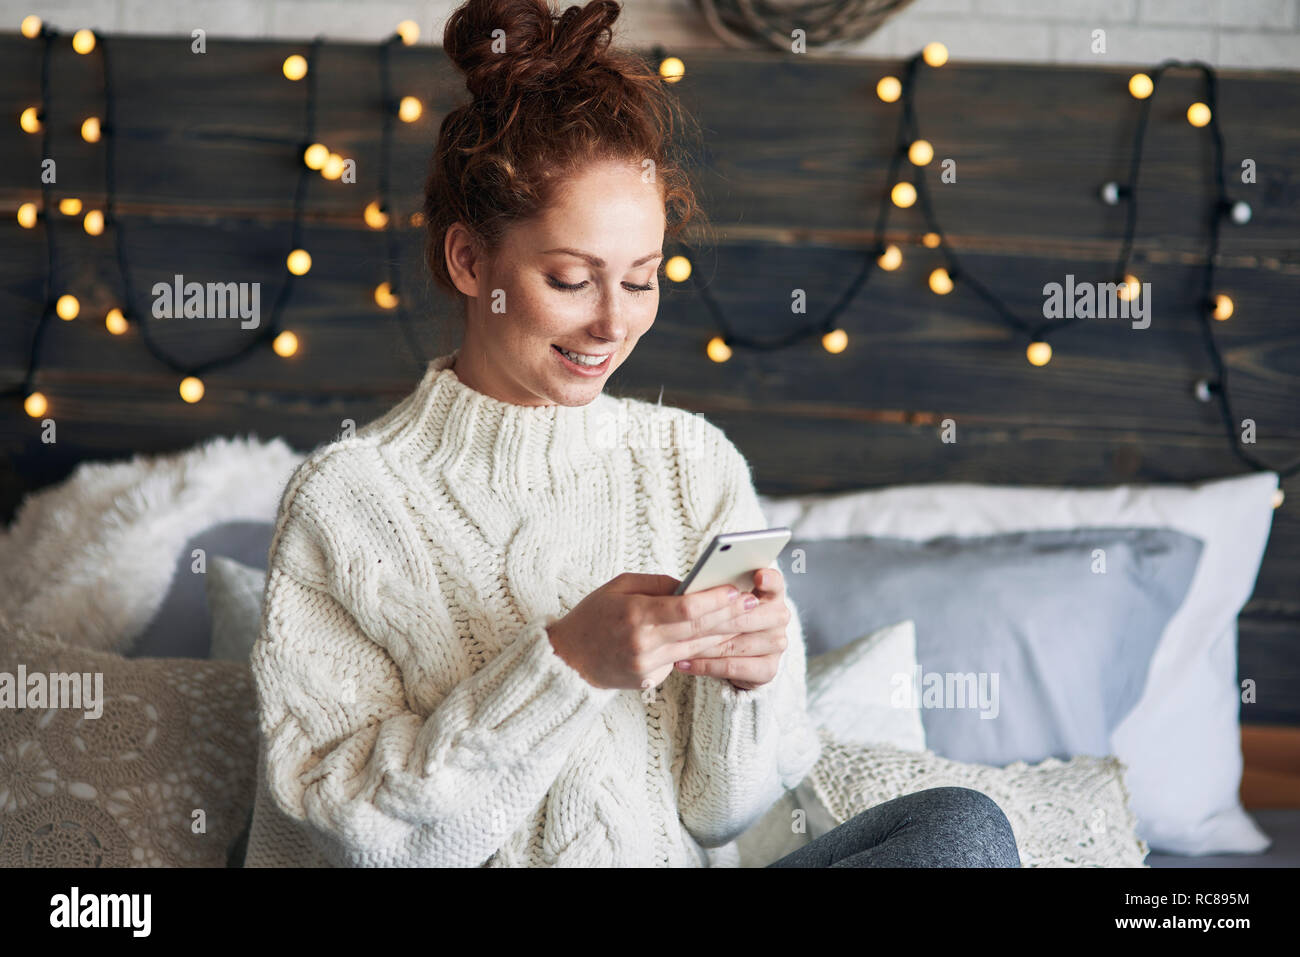 Woman texting on bed decorated with Christmas lights Stock Photo